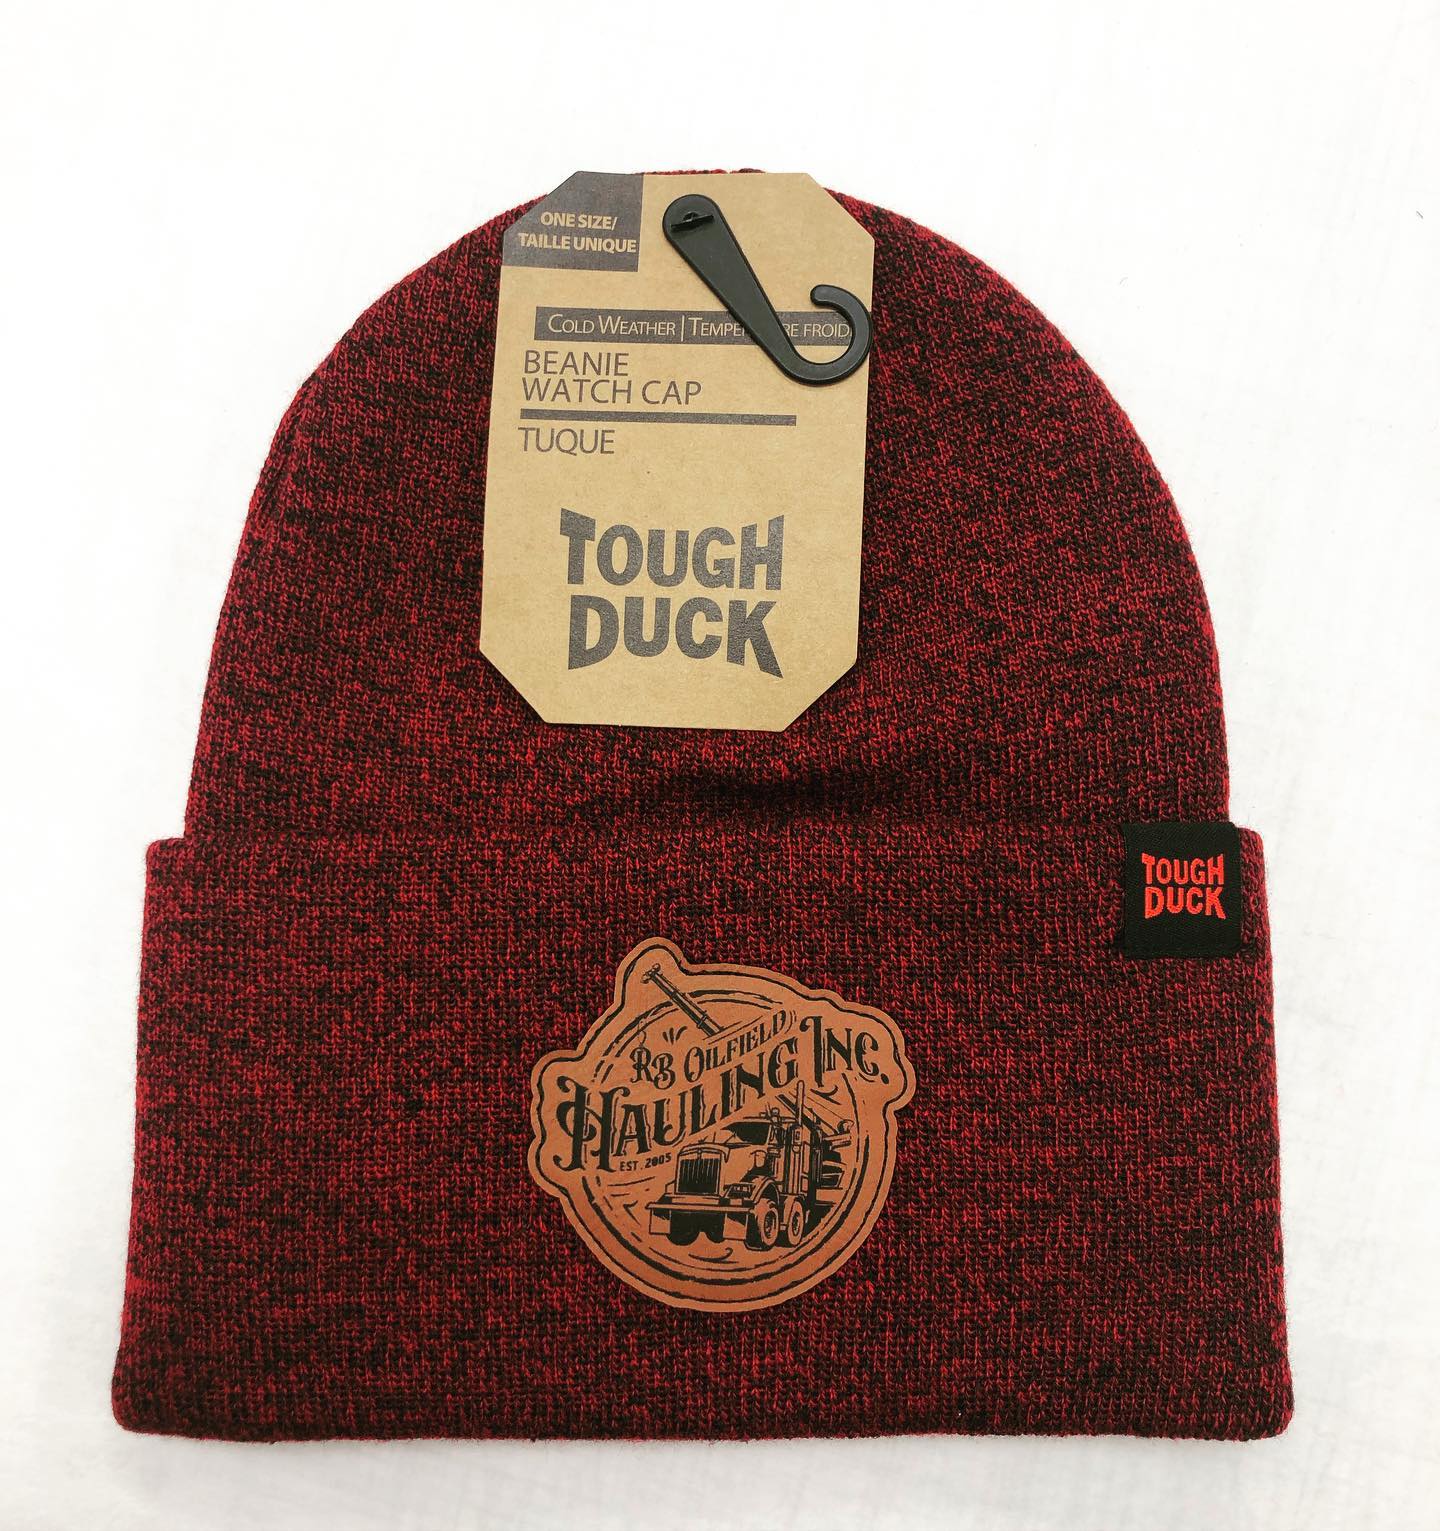 WA16 Tough Duck Toques with Leather Patch